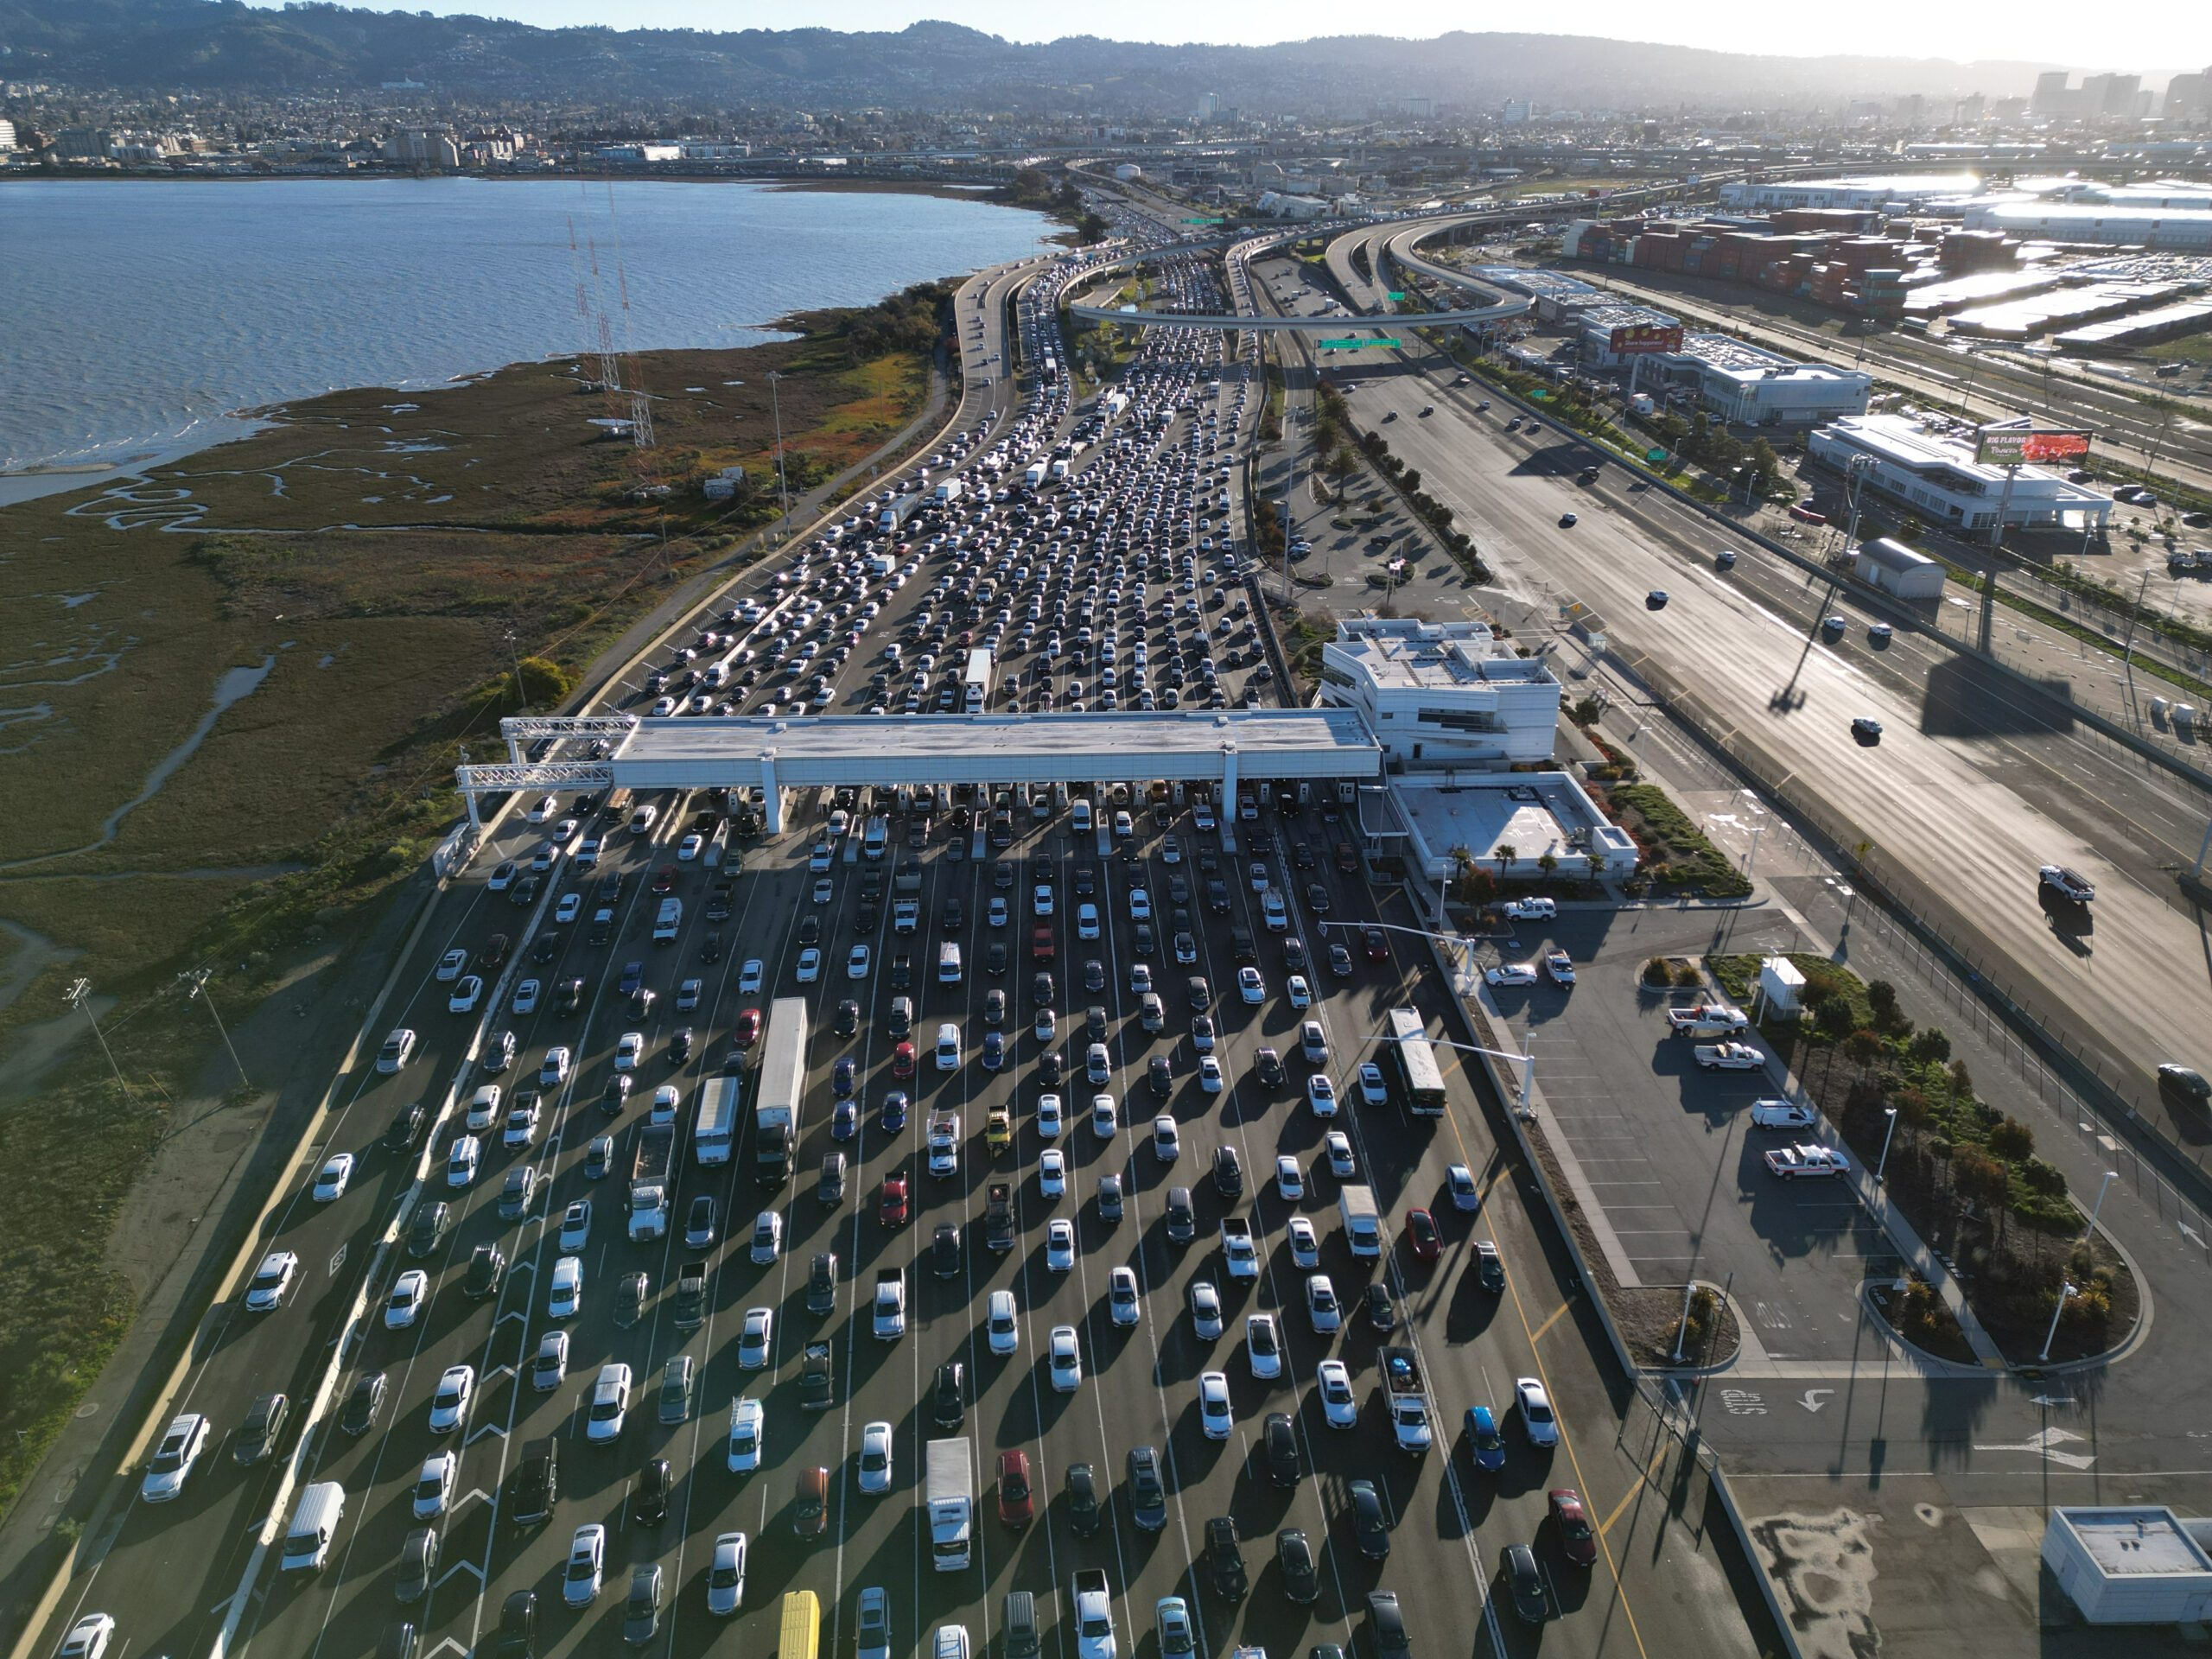 Have You Wracked Up Bay Bridge Toll Violations? Here’s How to Get Them Forgiven